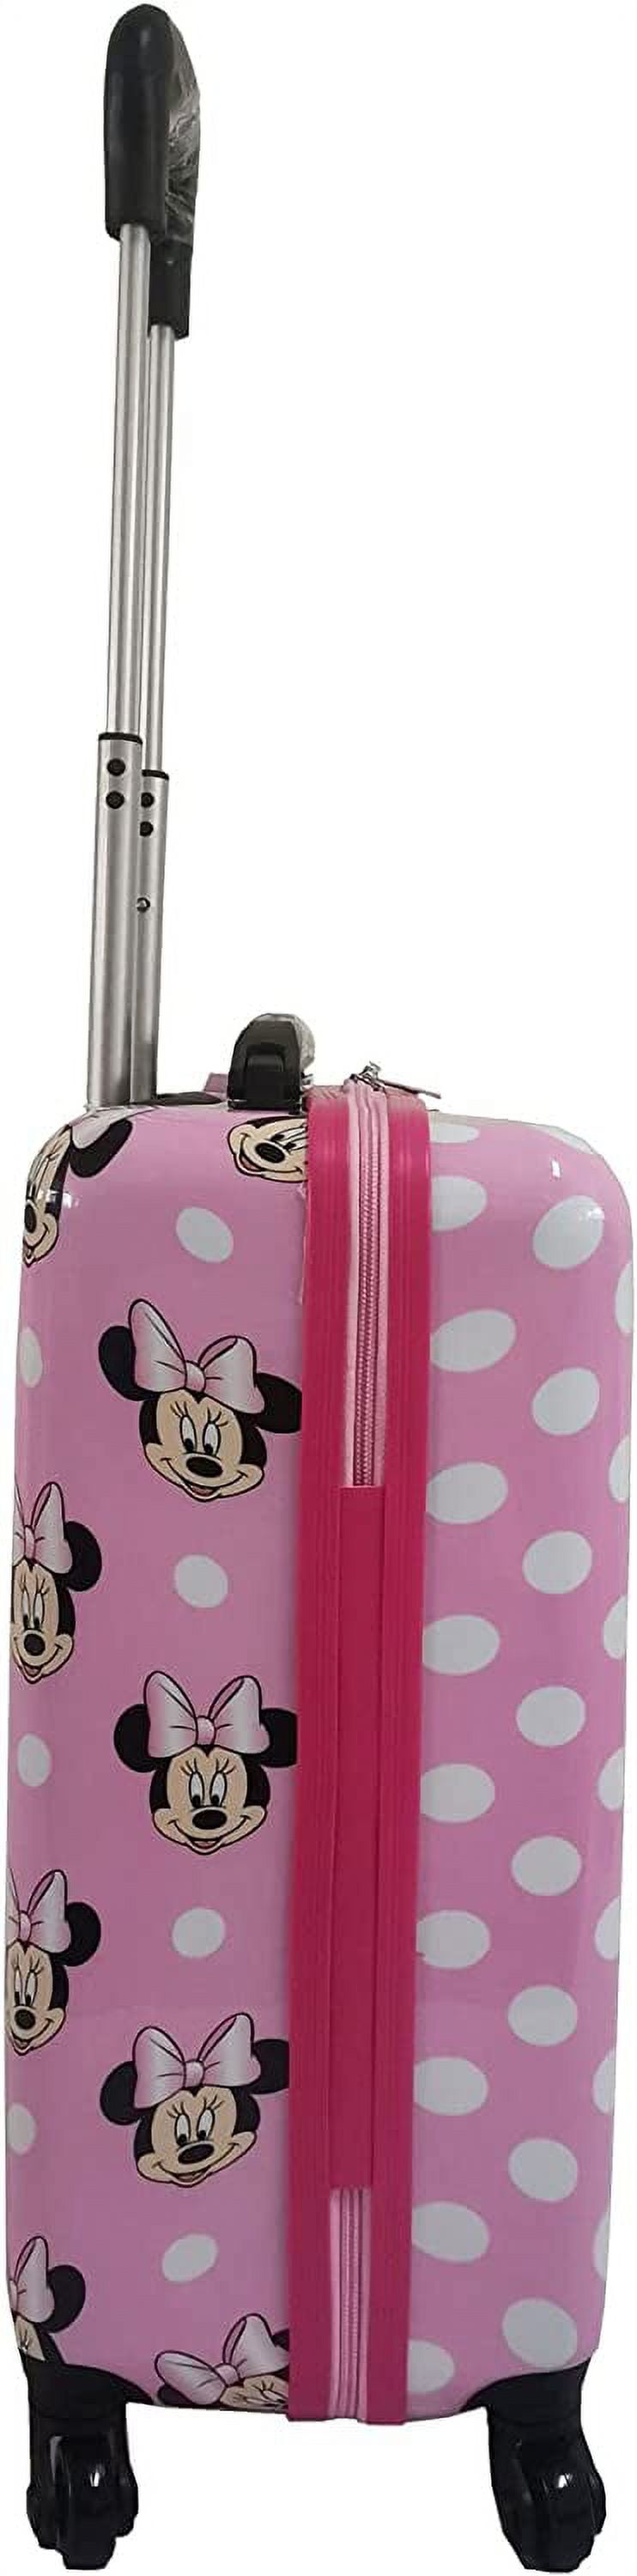 Kids Kids Hardside Luggage Spinner 20 Tween Mouse Minniee for Fast Suitcase Forward Carry-on inches